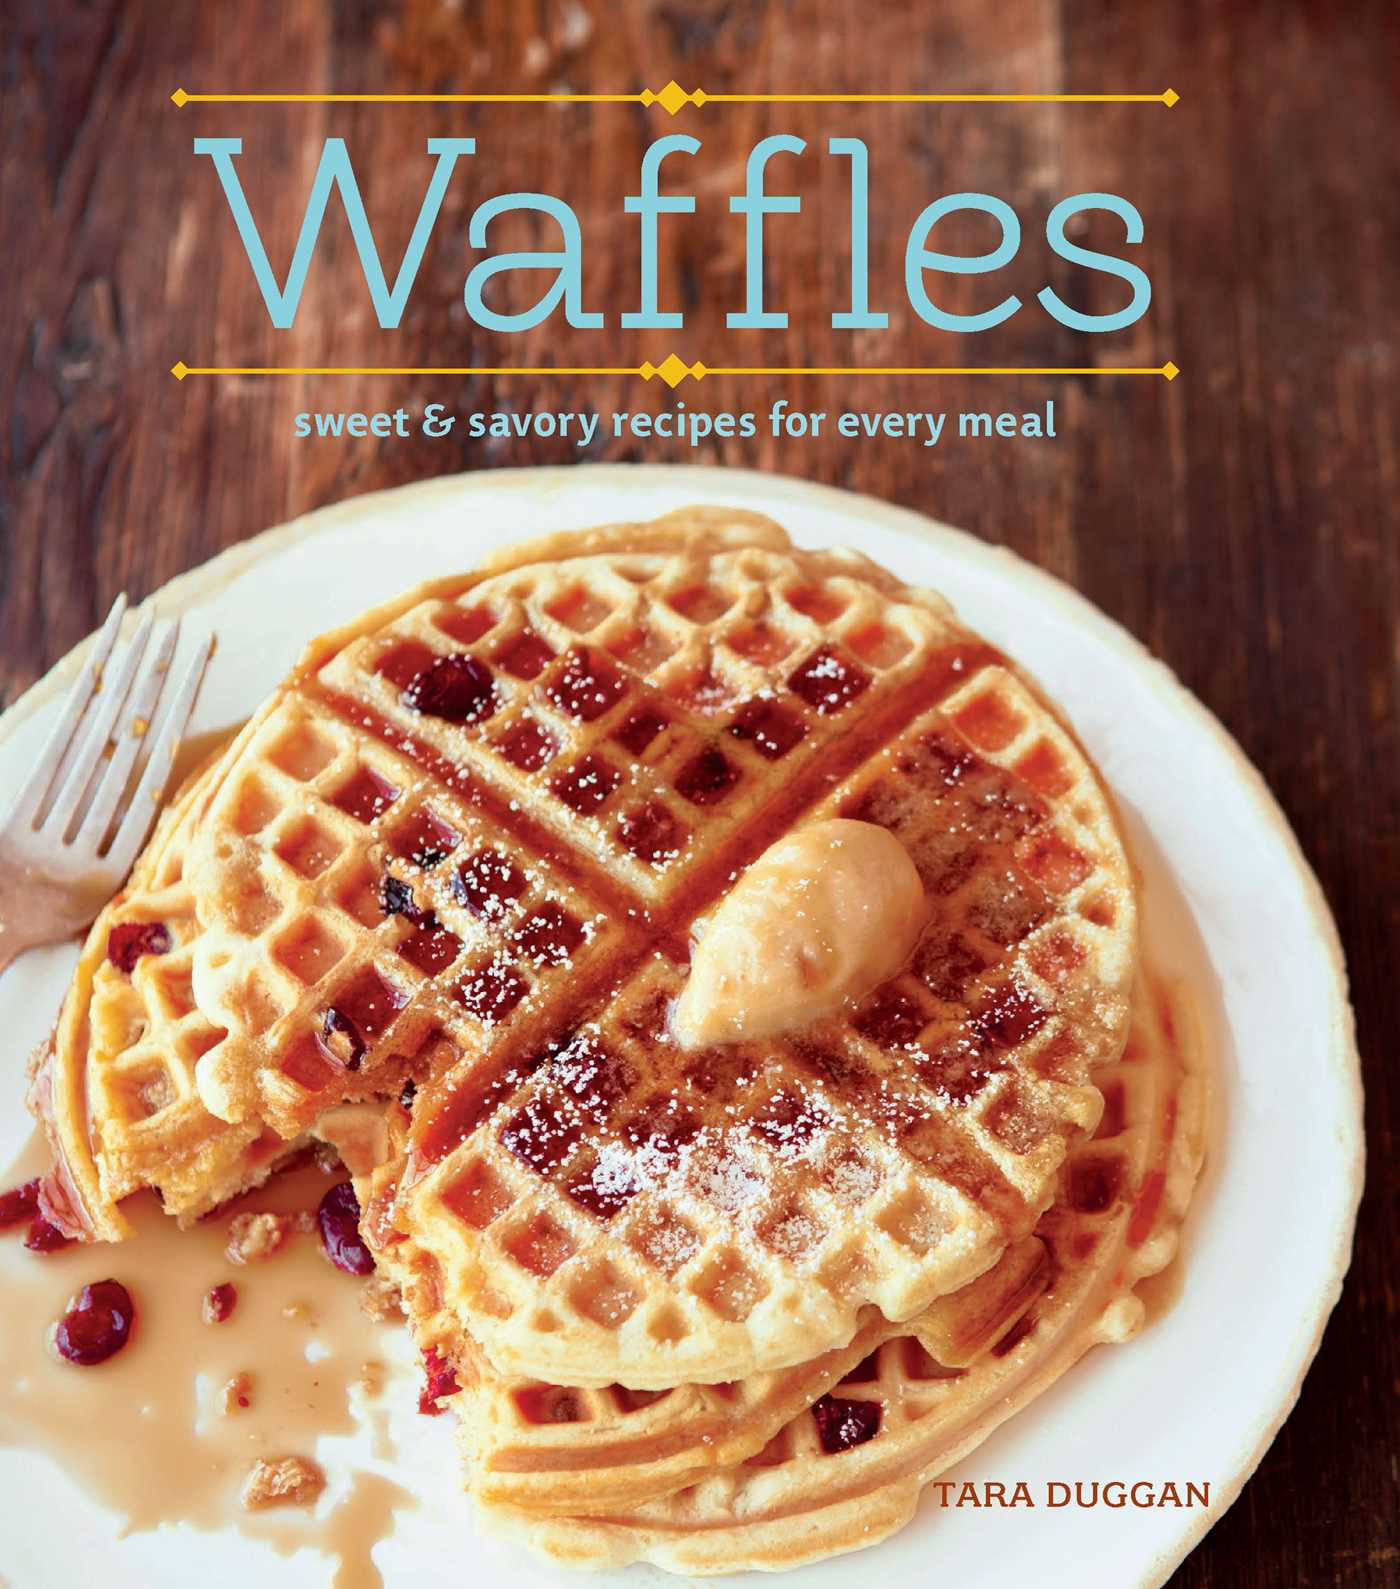 The best time to eat waffles is all the time.